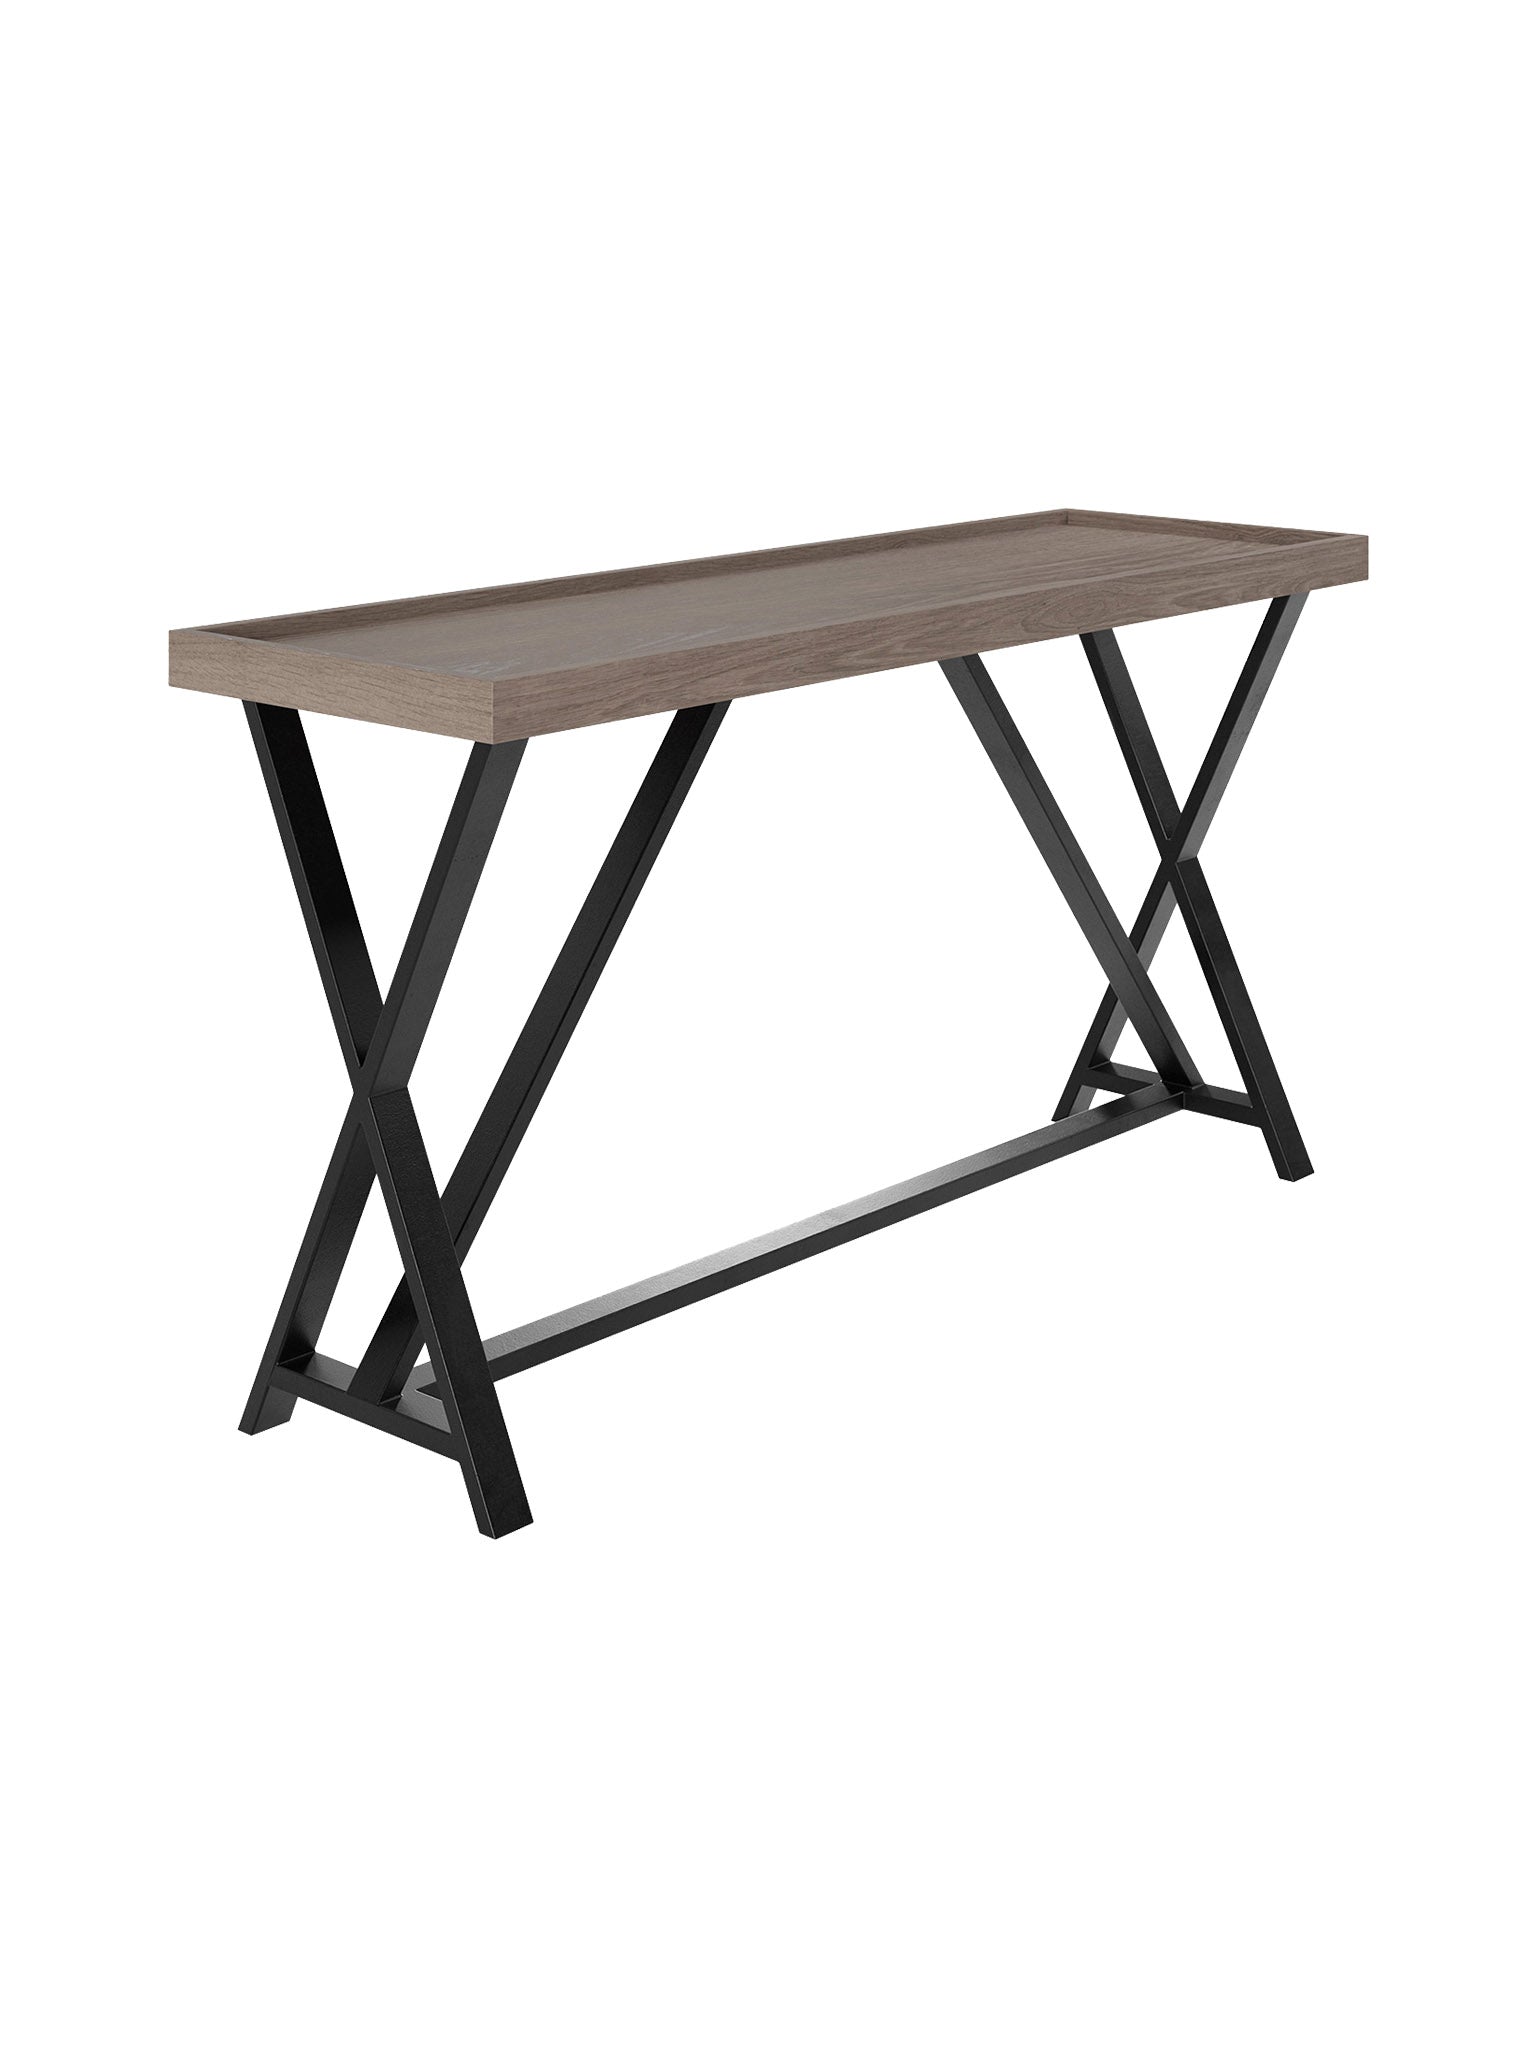 Wooden console table with black metal legs